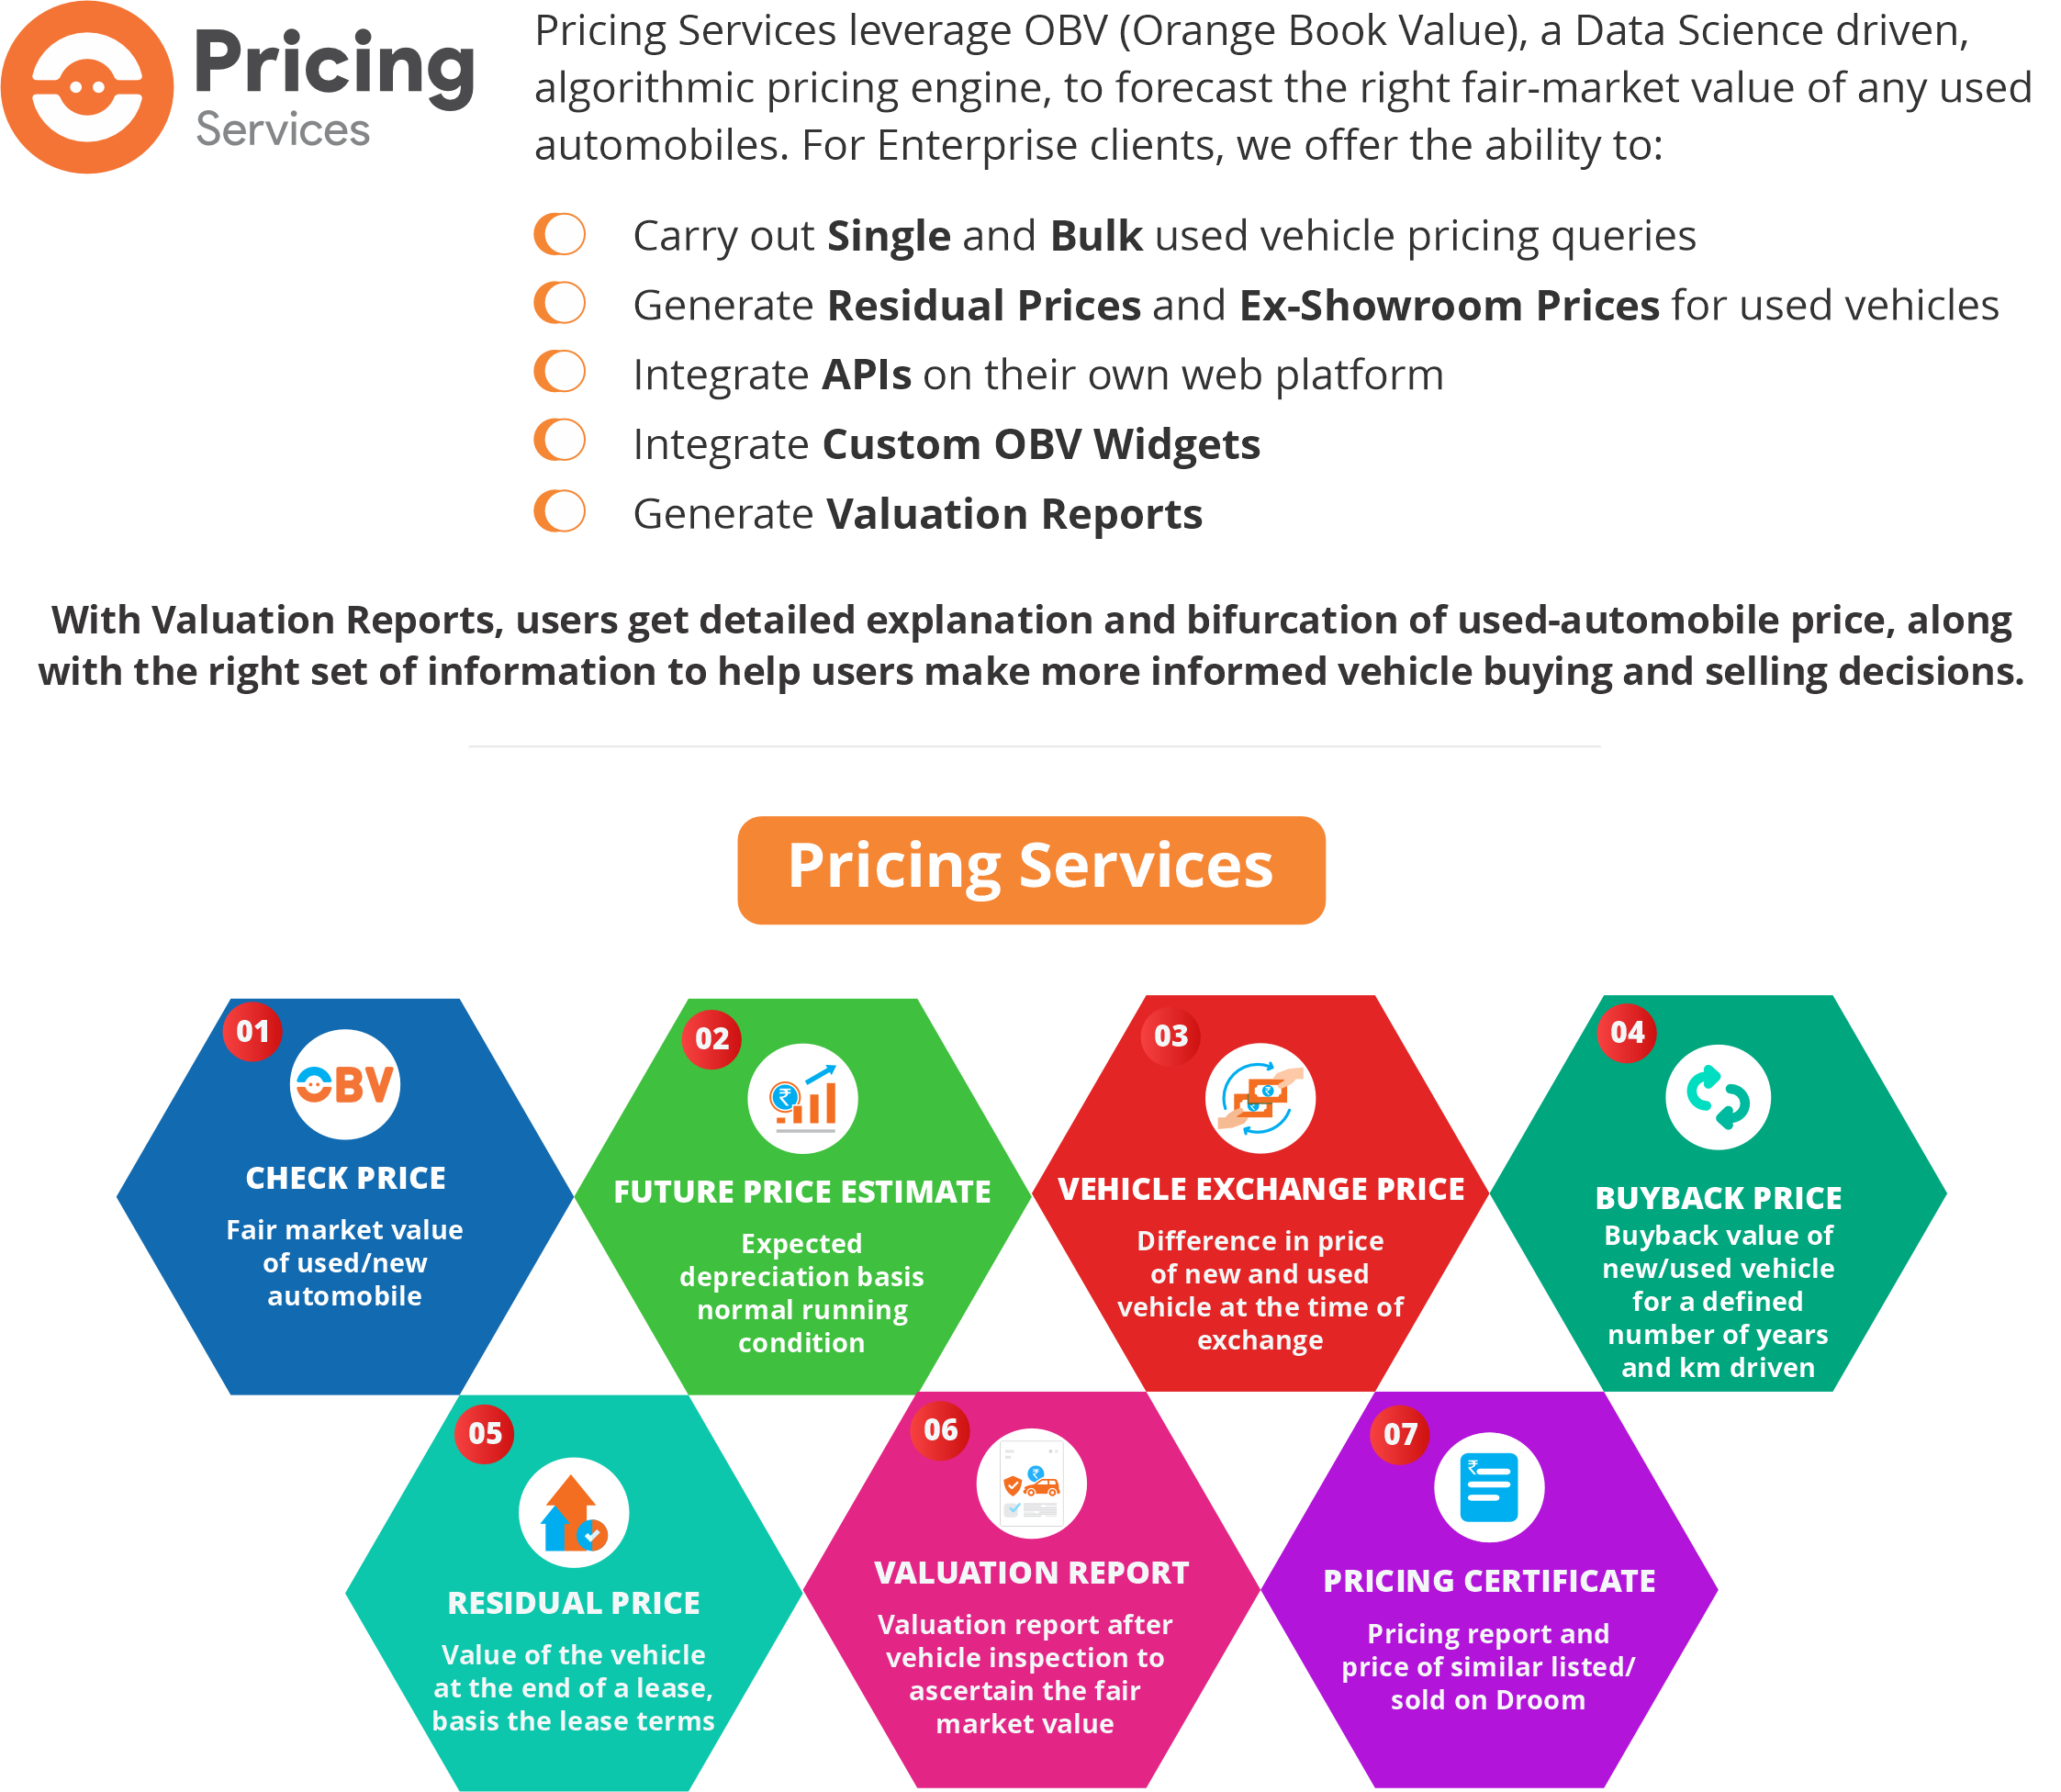 Pricing Services